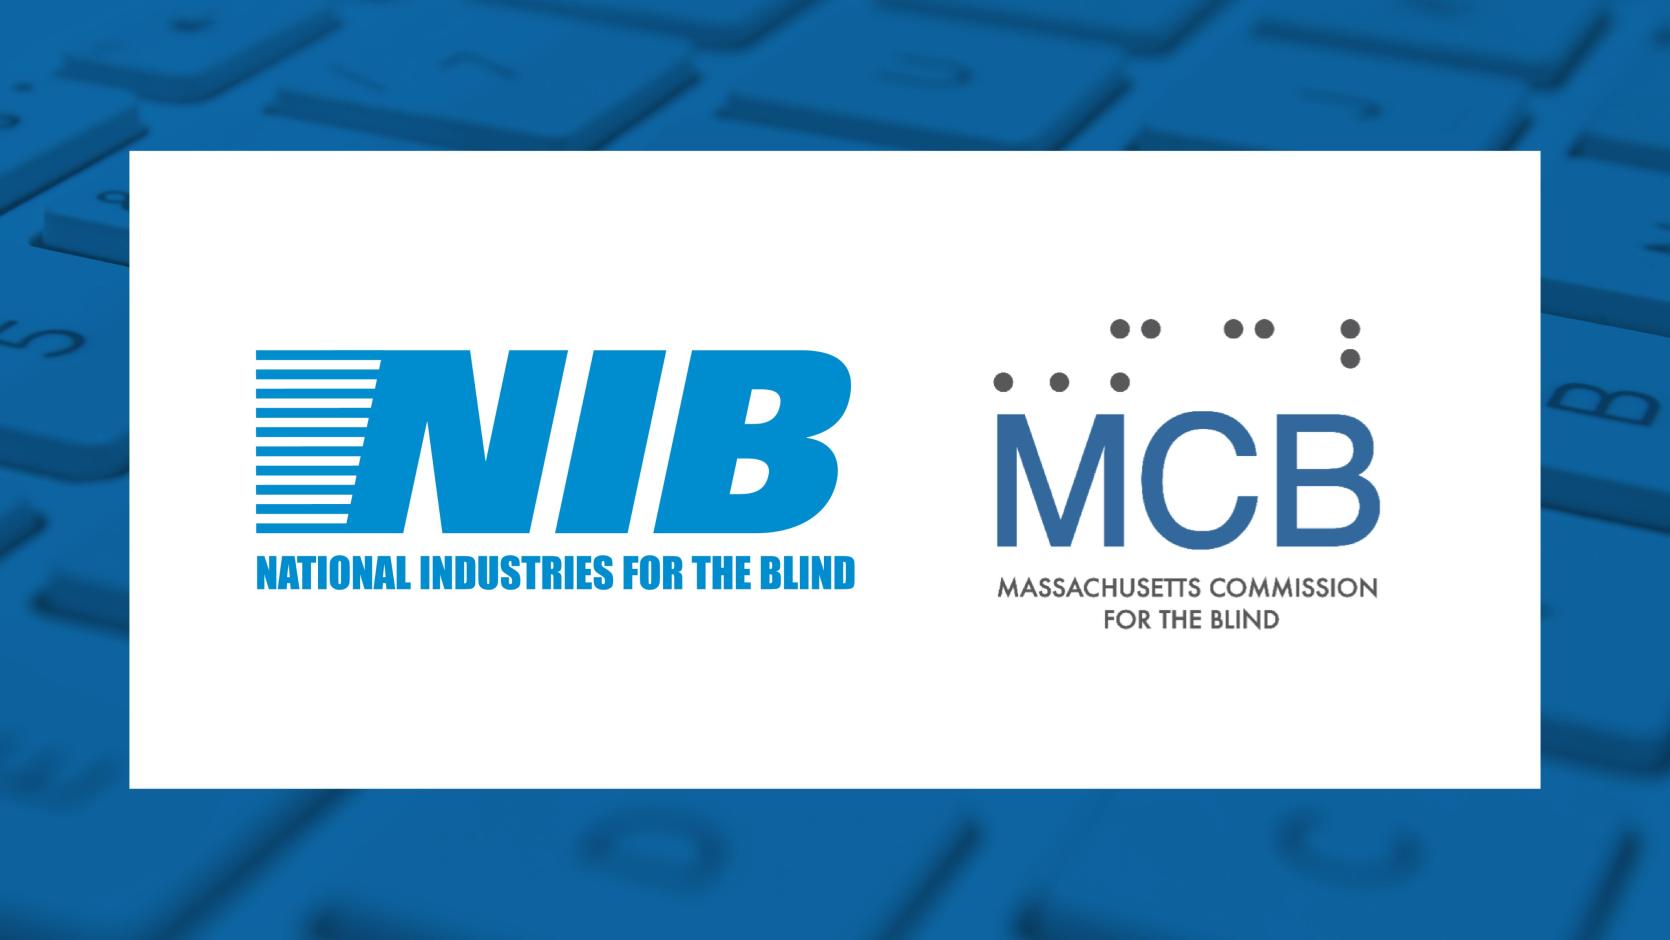 National Industries for the Blind NIB logo and Massachusetts Commission for the Blind MCB logo with blue border